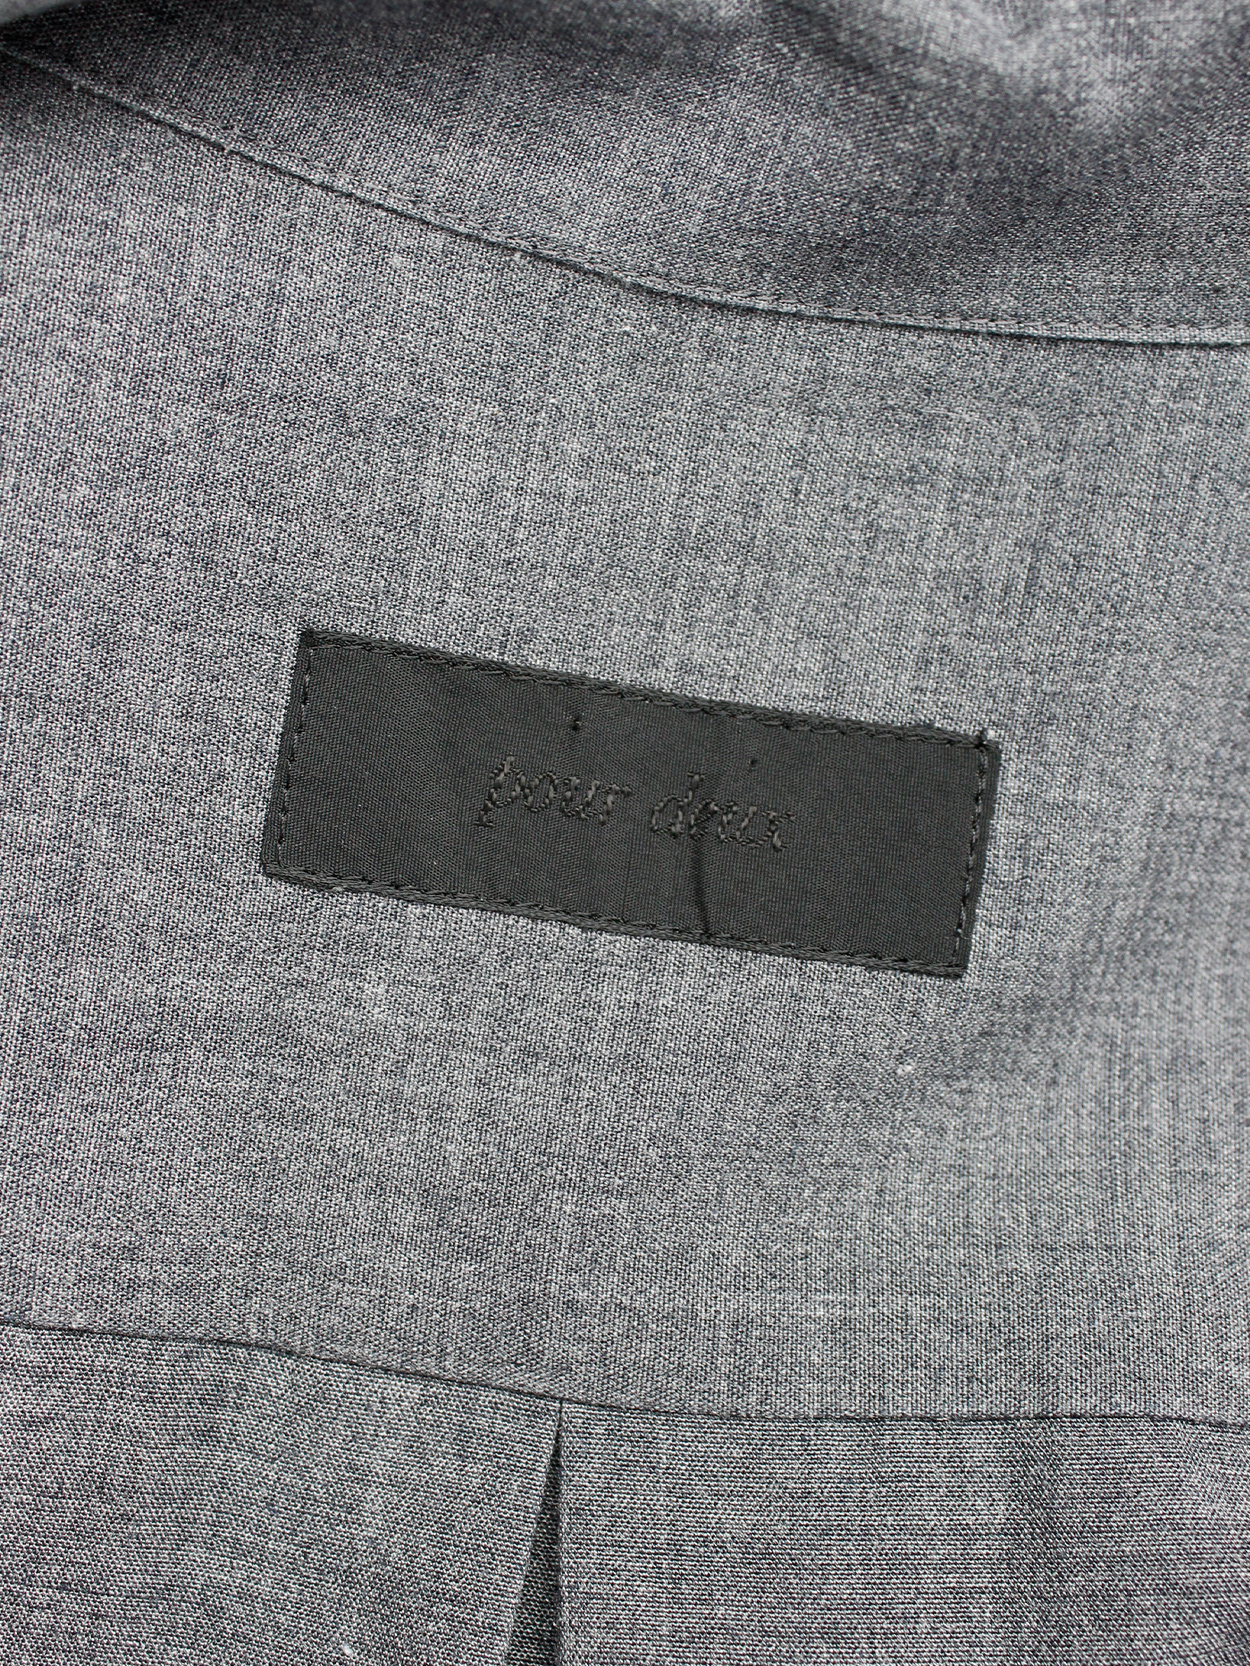 Pour Deux grey shirt with rectangle flaps across the chest (15)